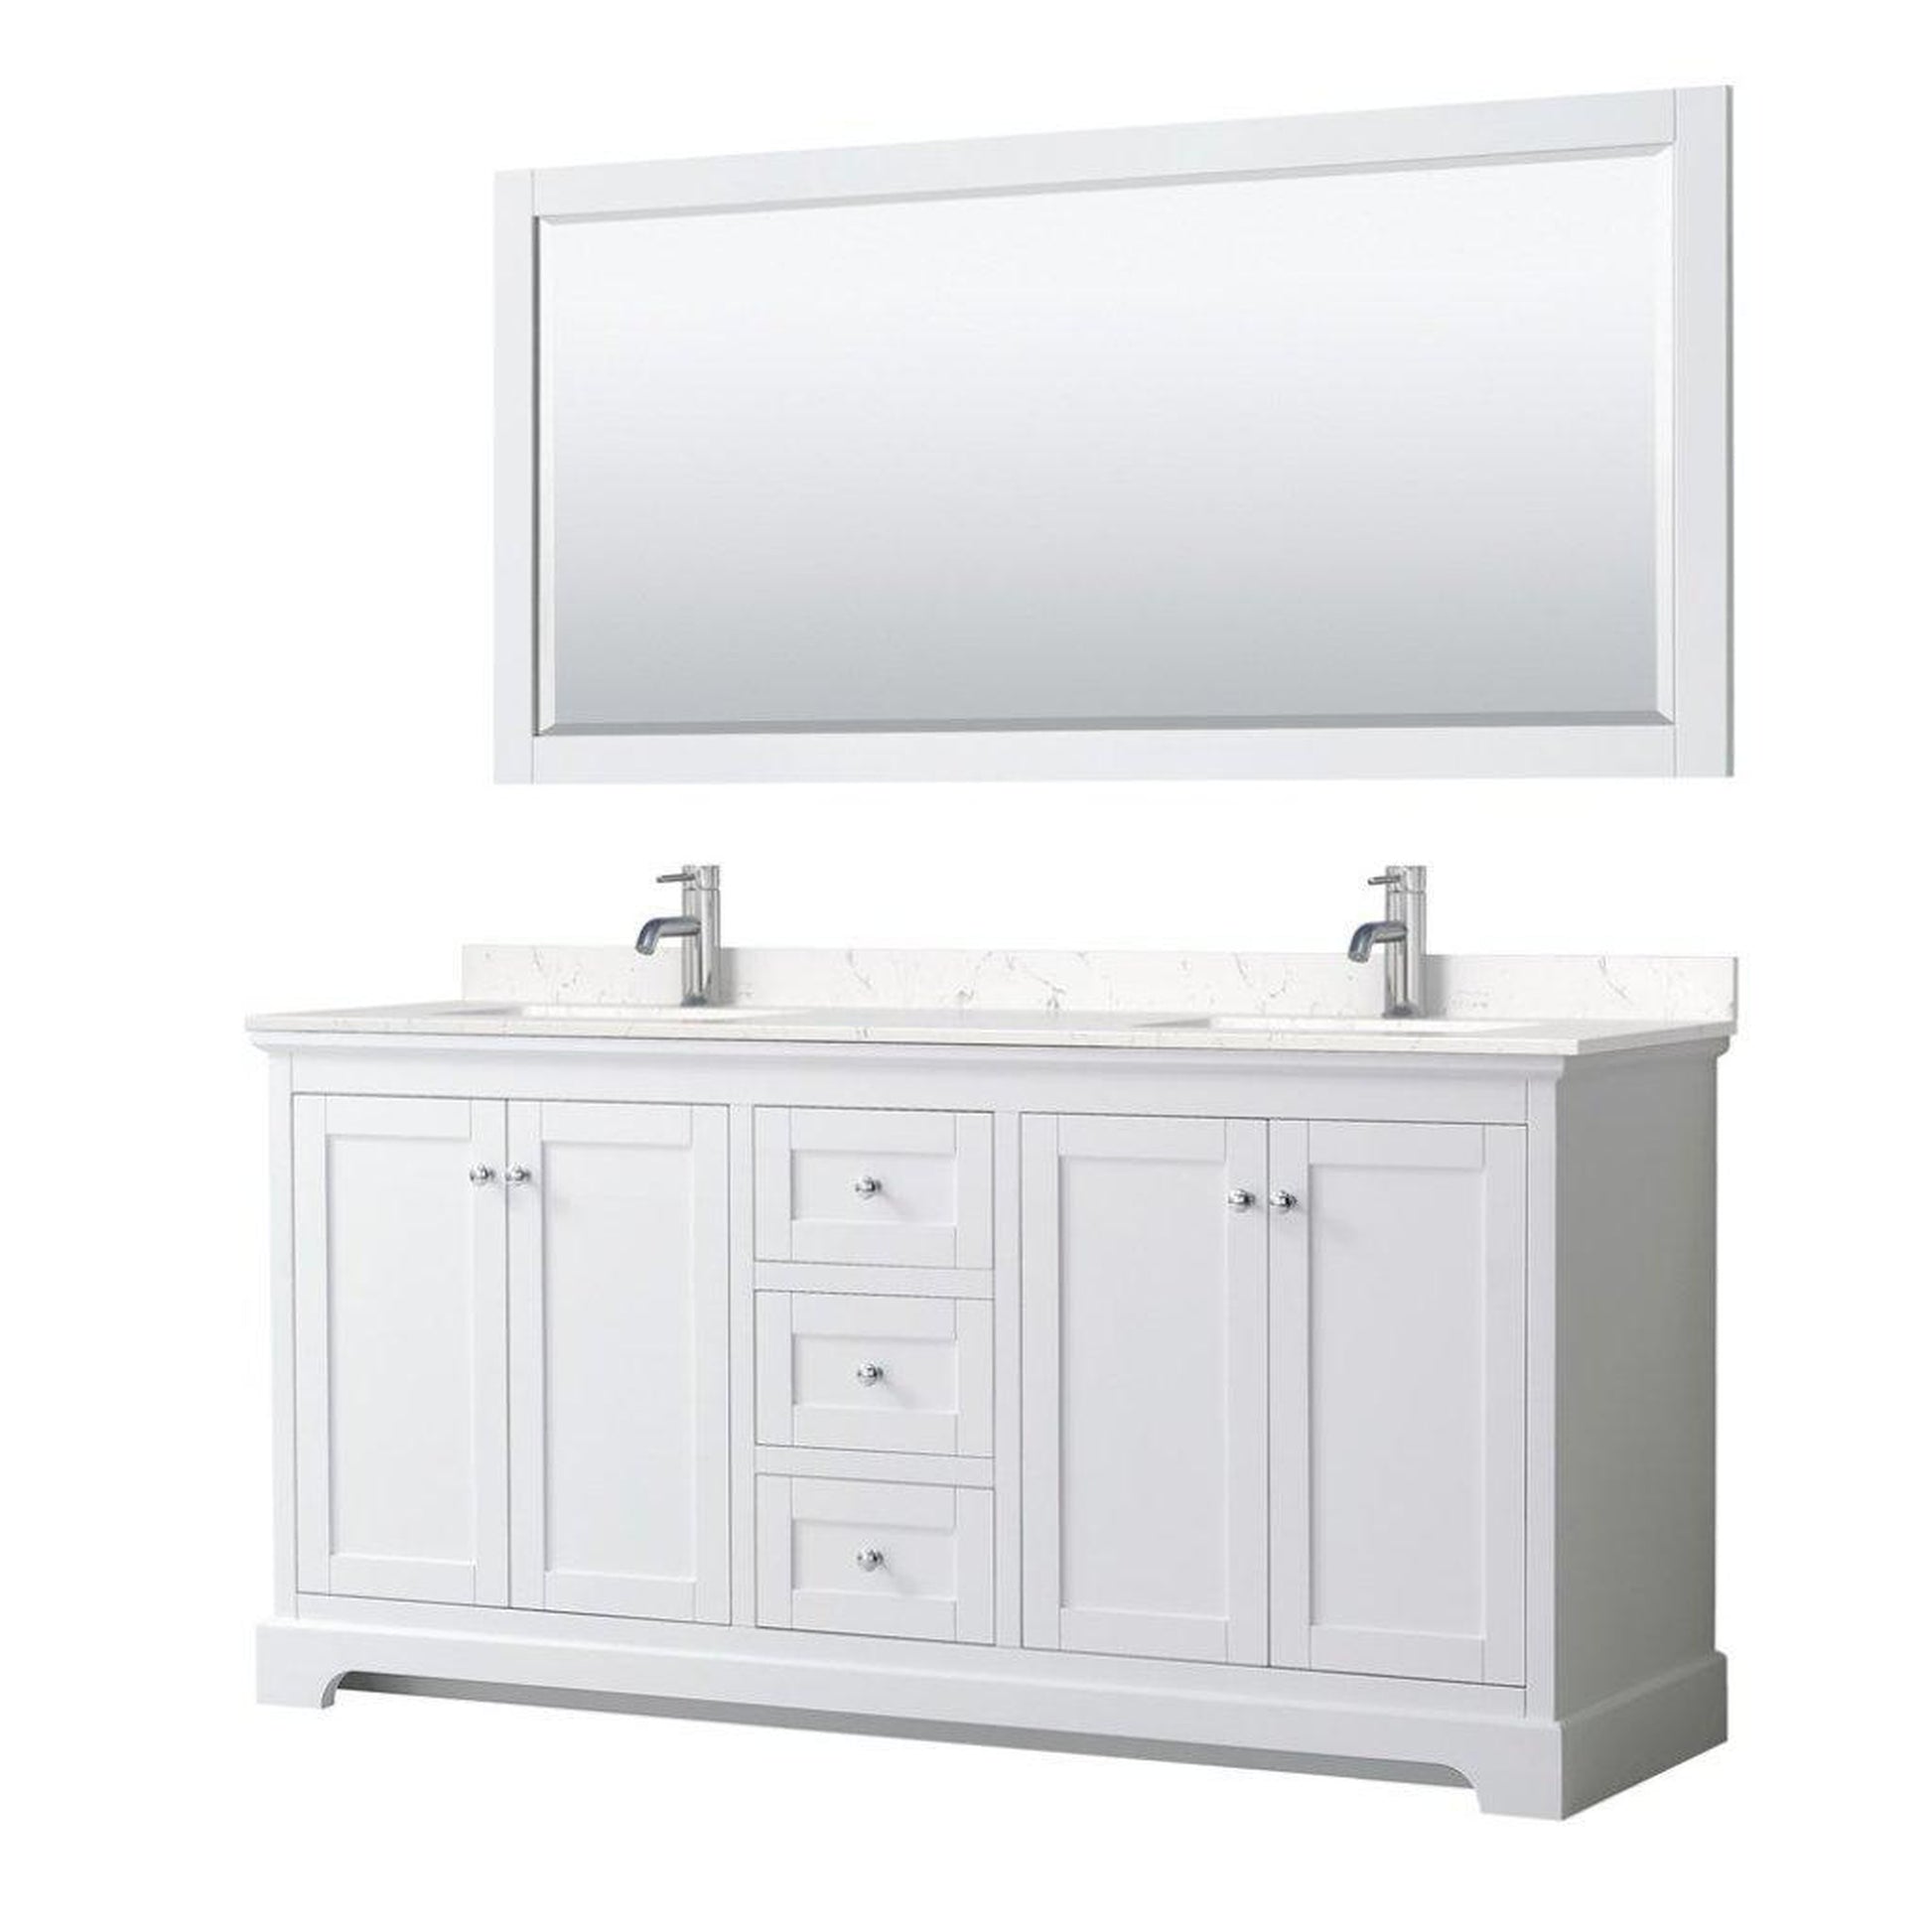 Wyndham Collection Avery 72" White Double Bathroom Vanity Set, Light-Vein Carrara Cultured Marble Countertop With 1-Hole Faucet, Square Sink, 70" Mirror, Polished Chrome Trims